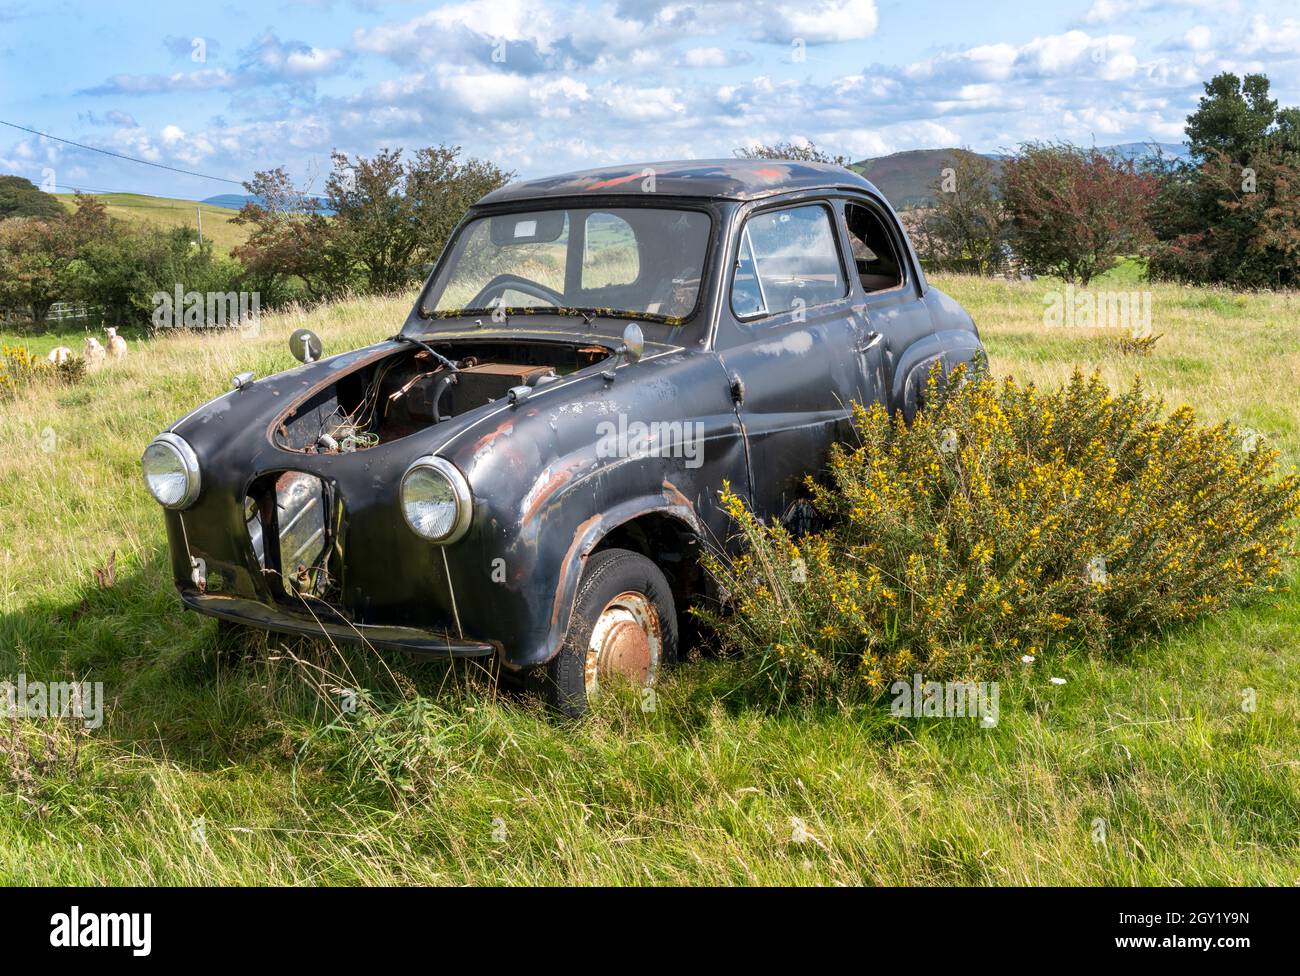 An abandoned Austin A30 motor car on show in North Wales, UK Stock Photo